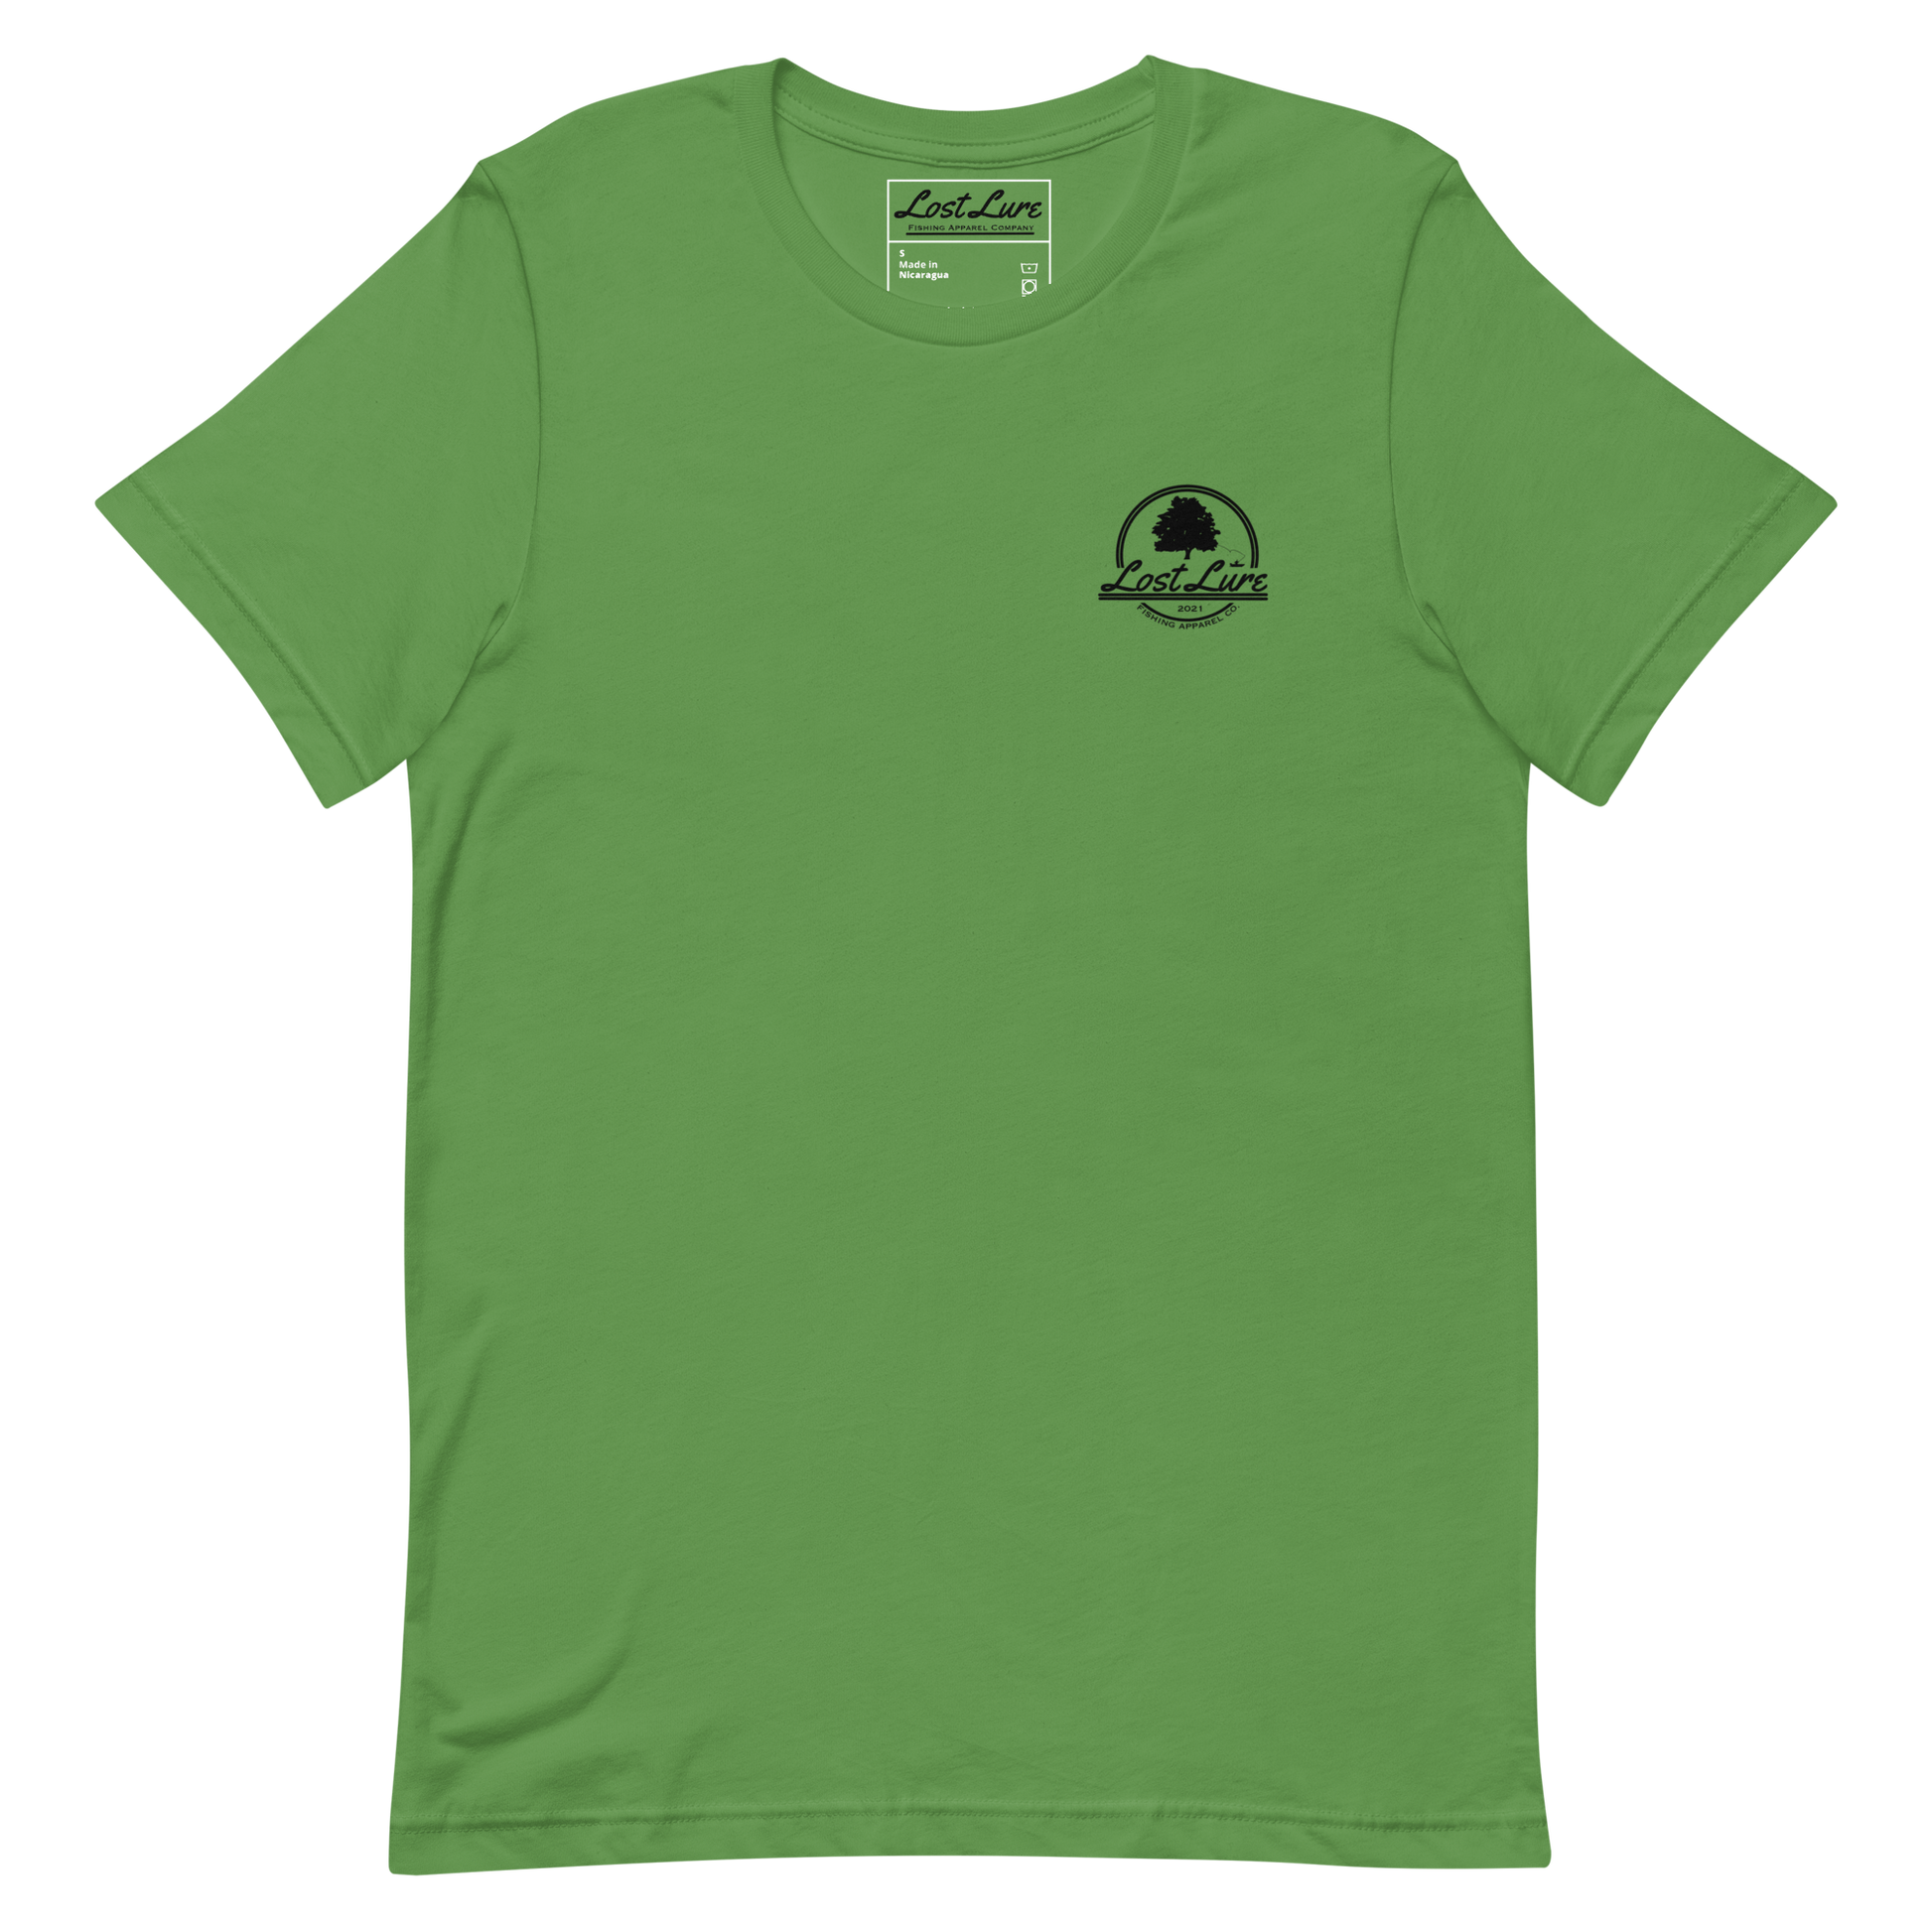 Cutthroat Trout fishing shirt. It’s an American traditional style design with a cutthroat trout and a dagger. The shirt reads Cutthroat trout, est. 2021, lost lure fishing apparel company. The front of the shirt has the lost lure logo. Green fishing shirt, front side